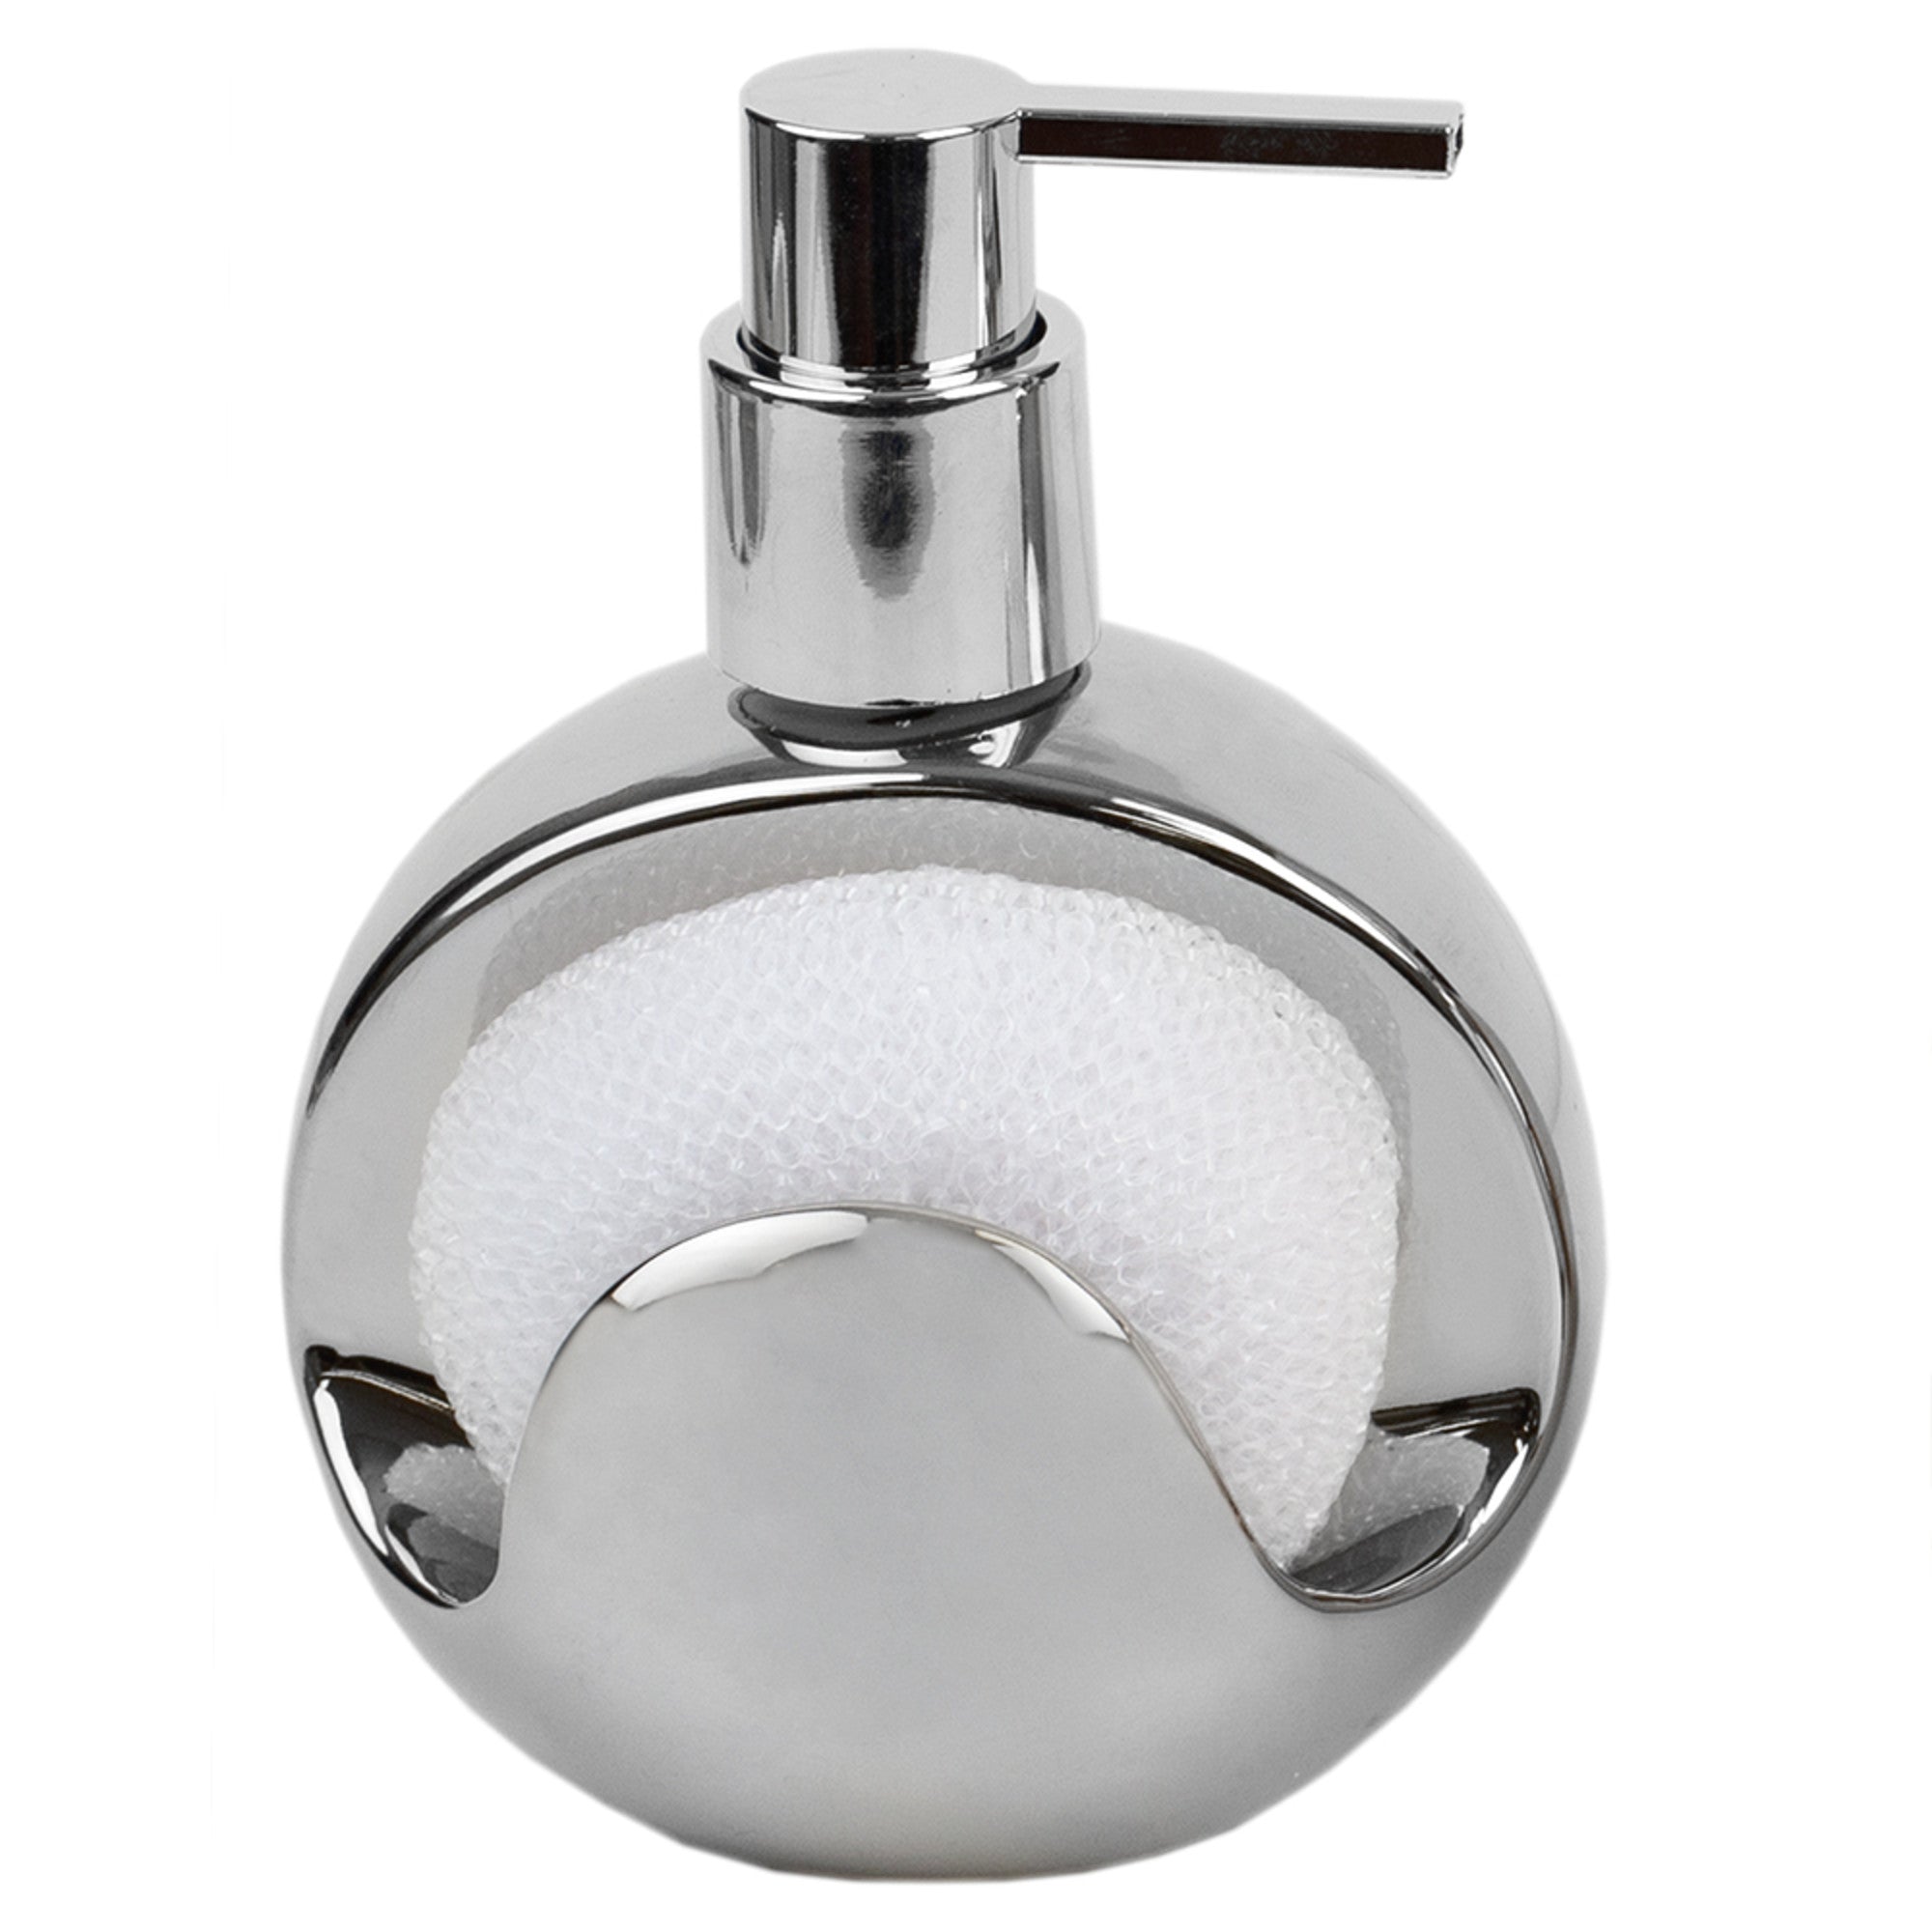 Home Basics Cosmic Ceramic Soap Dispenser with Steel Top and Fixed Sponge Holder - Assorted Colors